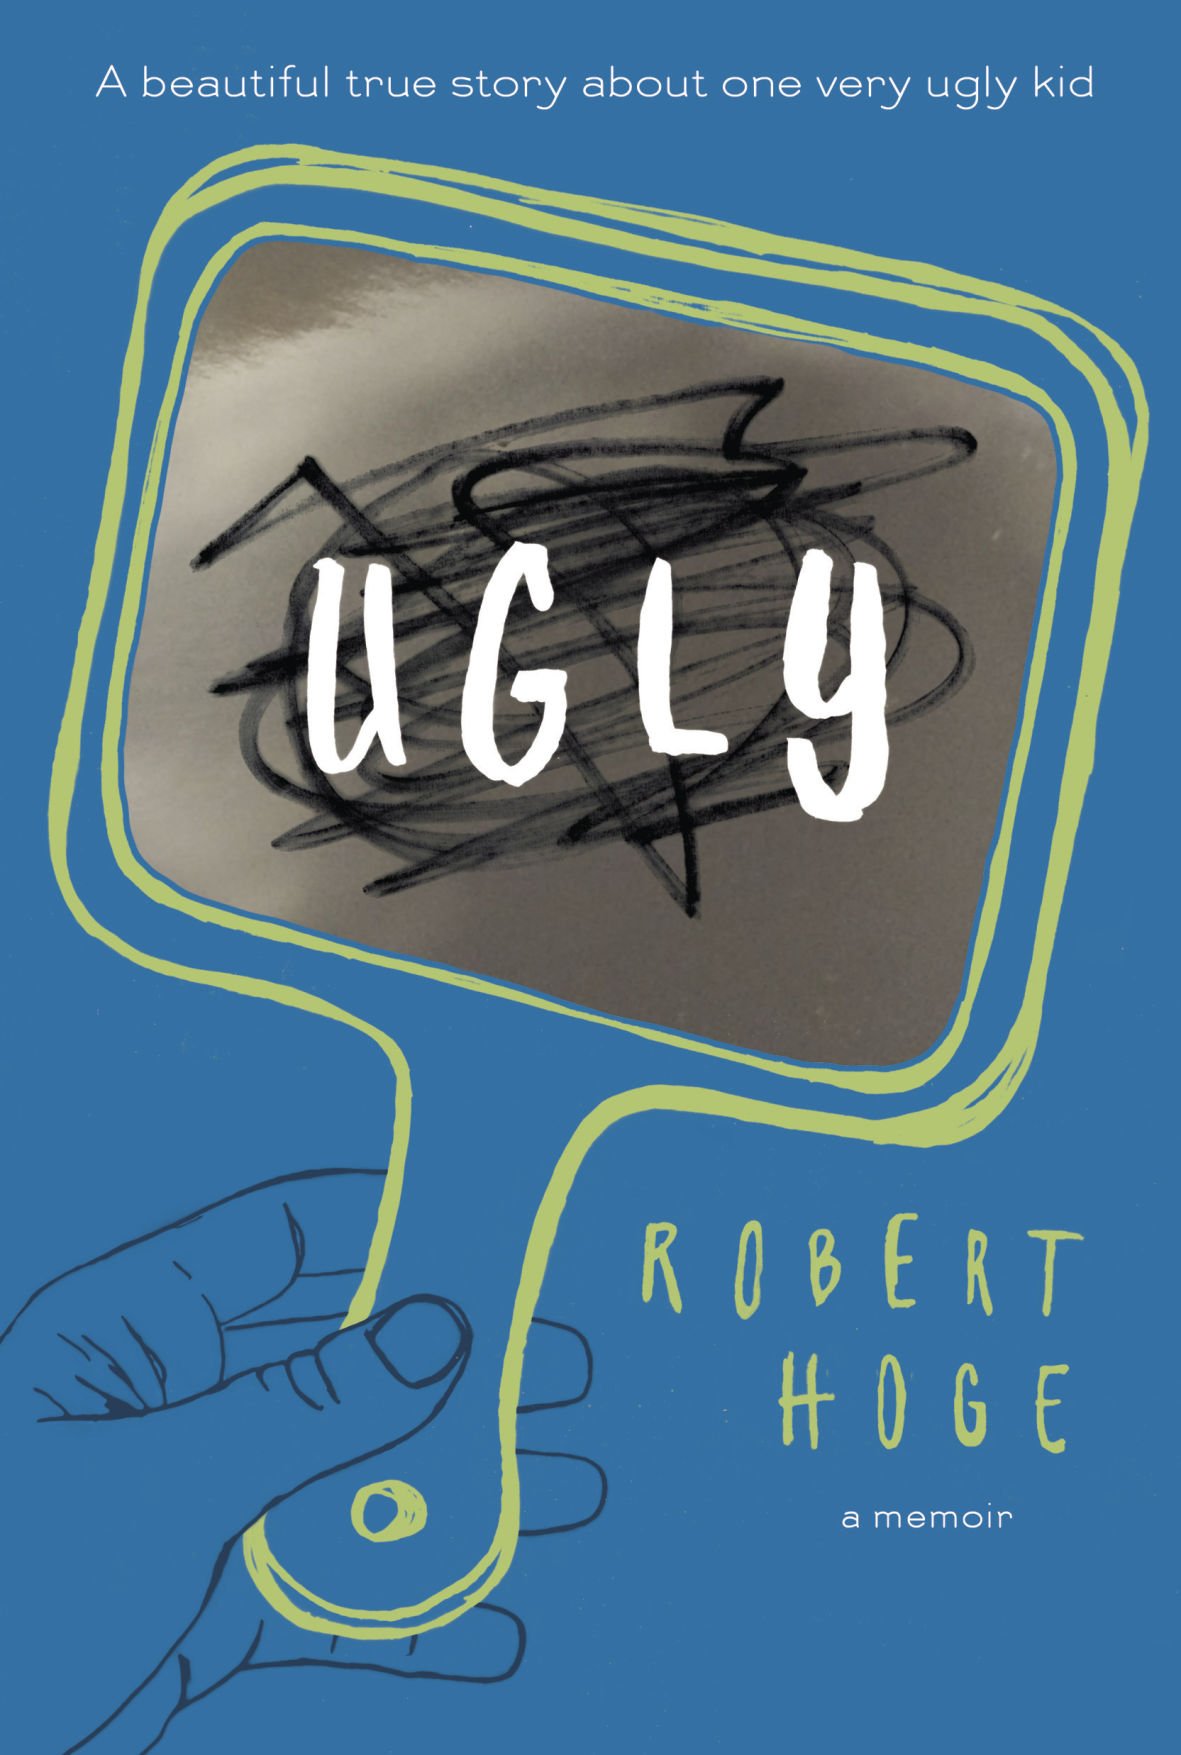 Review "Ugly," by Robert Hoge Mo Books